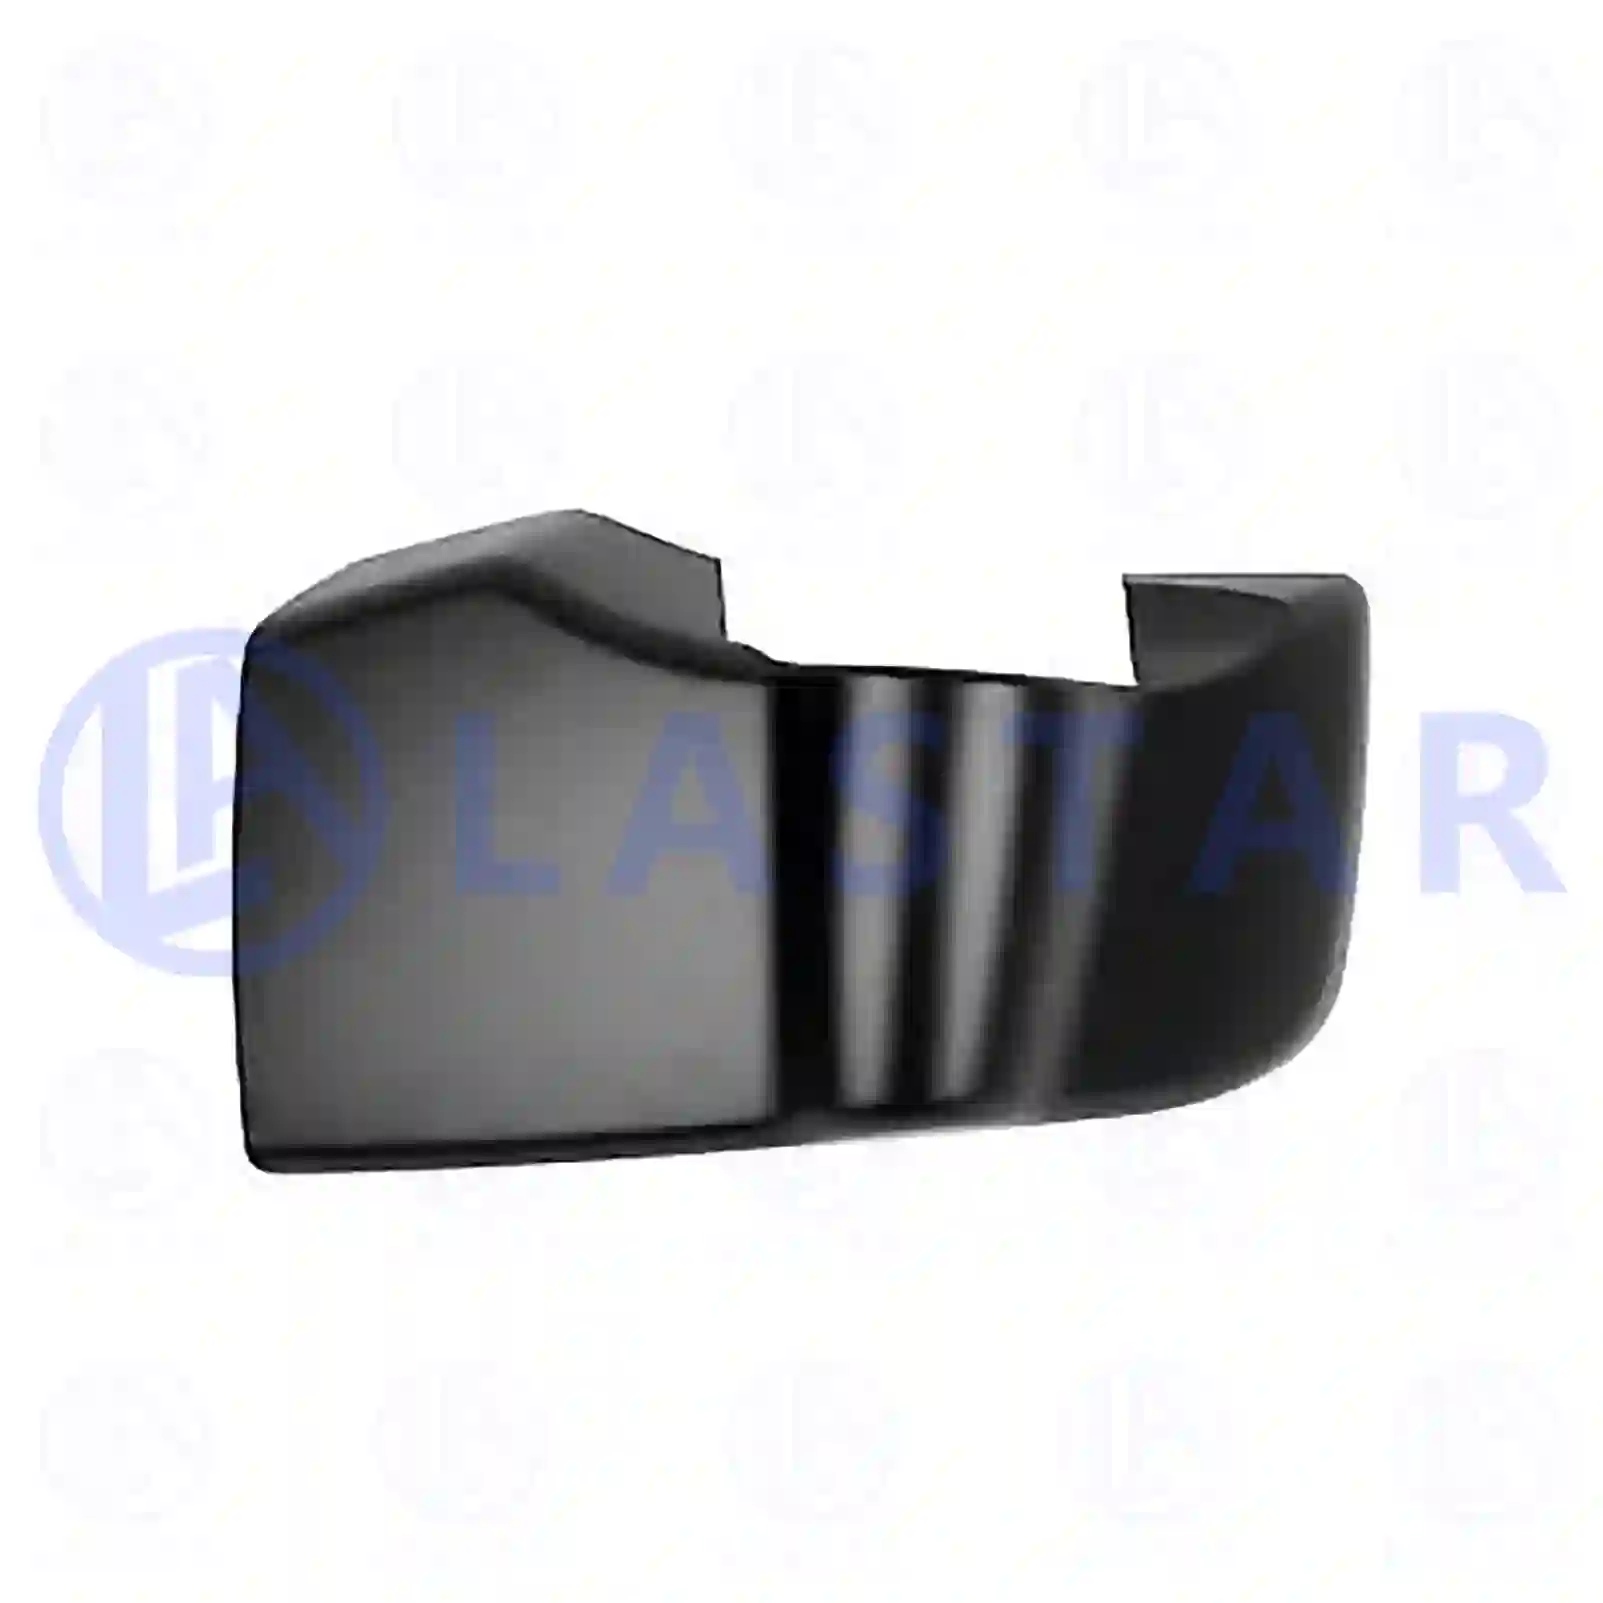 Cover, left, 77718588, 81637320075, 2V5857085, ZG60464-0008 ||  77718588 Lastar Spare Part | Truck Spare Parts, Auotomotive Spare Parts Cover, left, 77718588, 81637320075, 2V5857085, ZG60464-0008 ||  77718588 Lastar Spare Part | Truck Spare Parts, Auotomotive Spare Parts